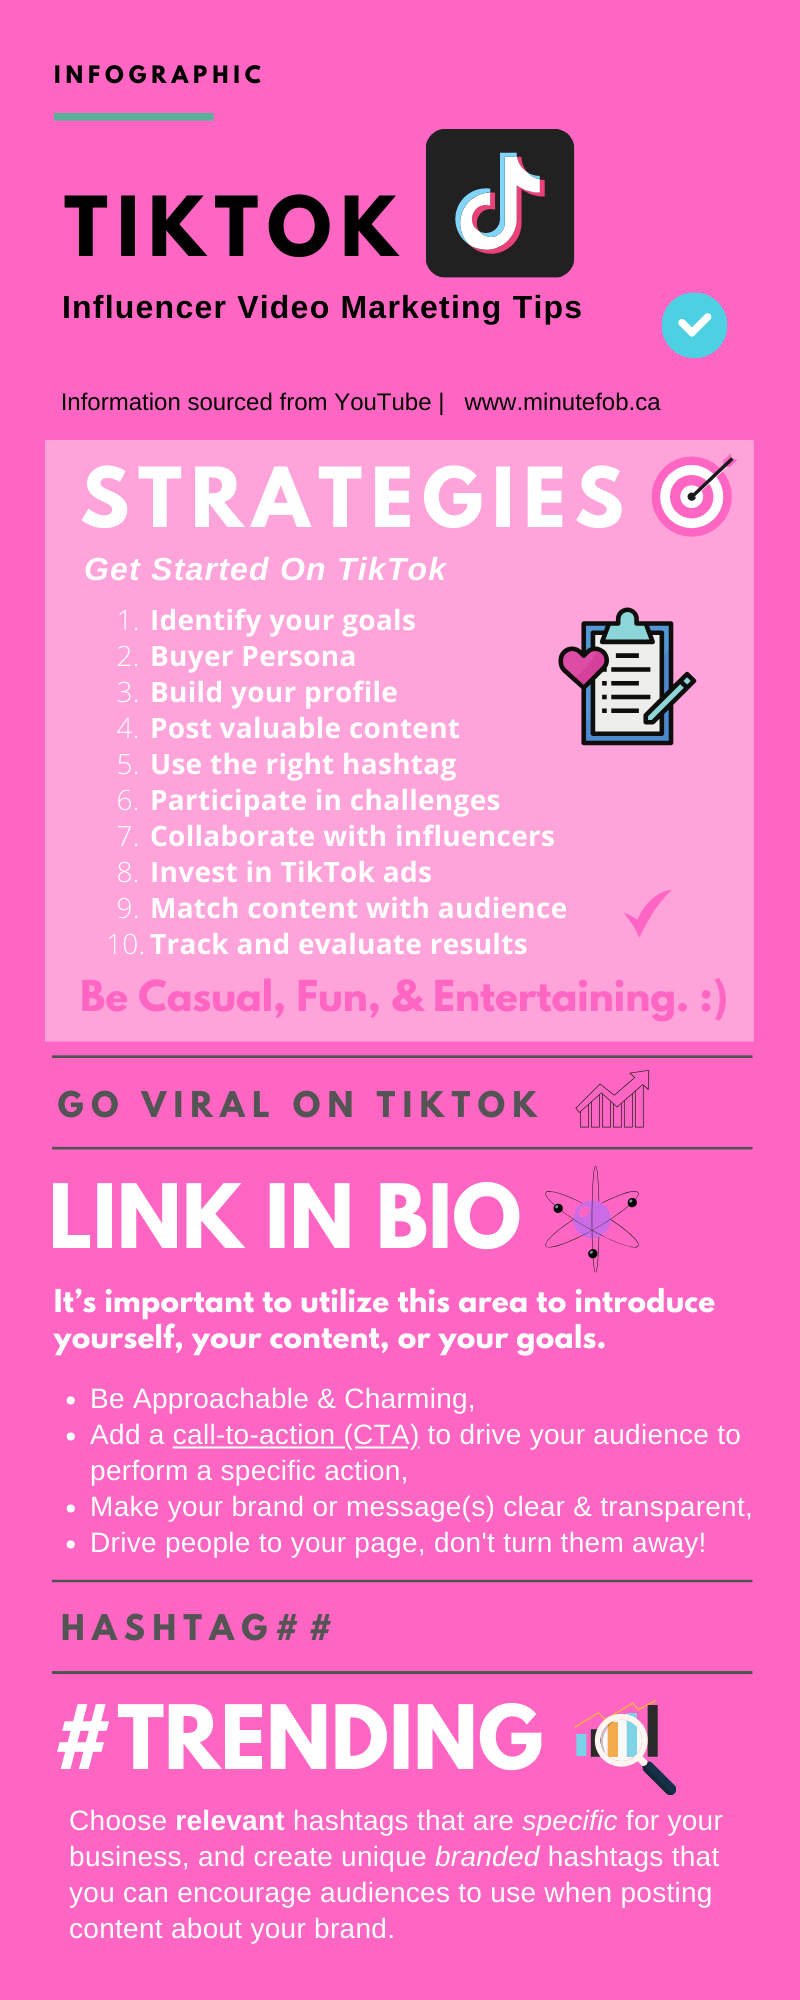 7 Super Effective Tips for Growing Your TikTok Following! - Stop and Gas